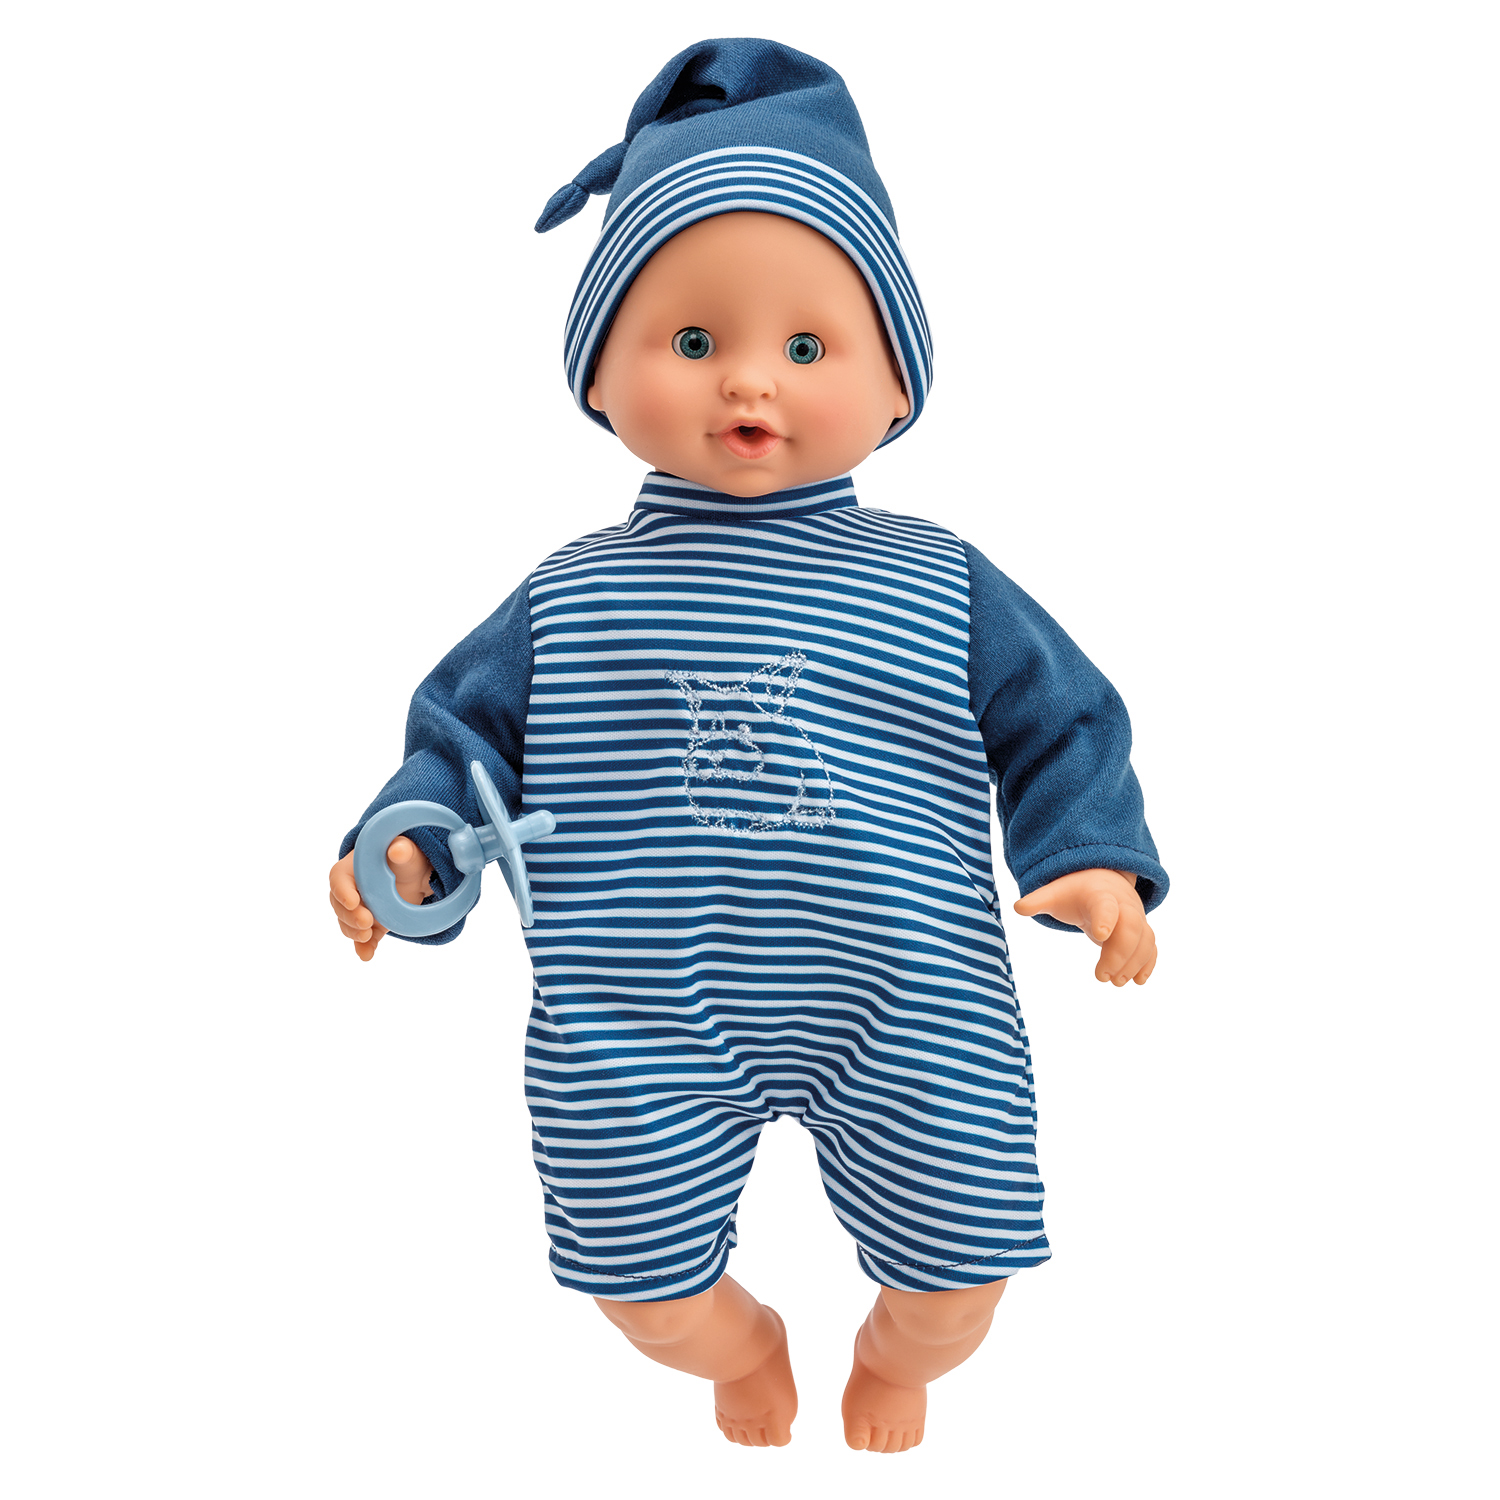 Puppen lundby	babypuppe olle